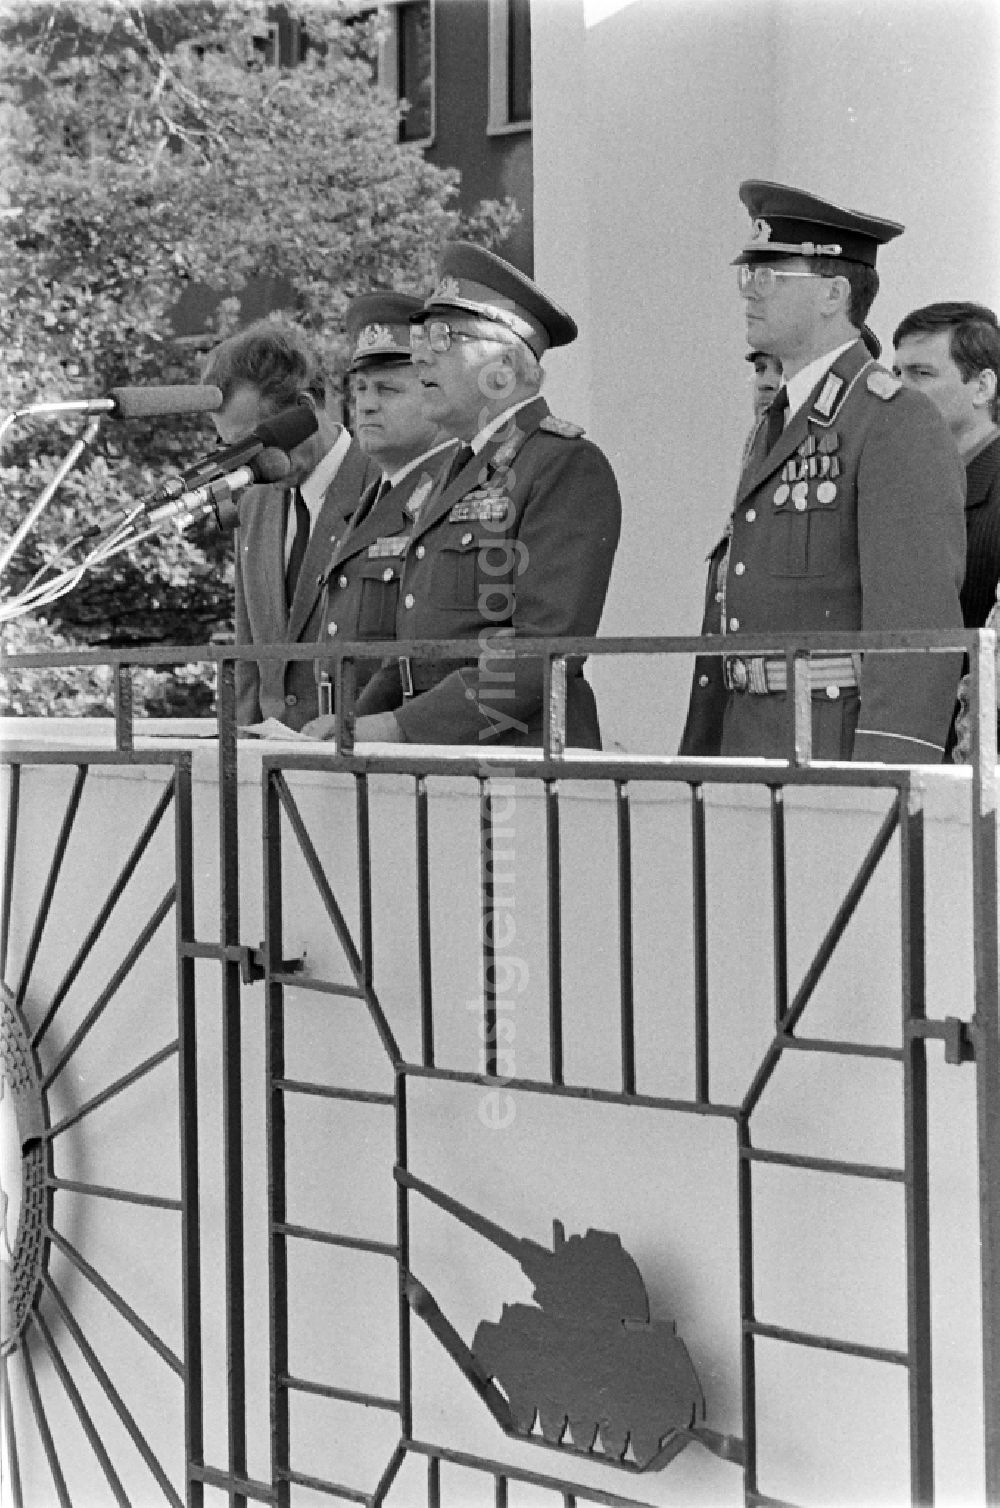 GDR photo archive: Goldberg - Honorary grandstand with Major General Horst Stechbarth and soldiers and officers of Panzer Regiment 8 (PR-8) on the occasion of the ceremonial and media-effective dissolution of the troop unit on the grounds of the Artur-Becker barracks in Goldberg in the state of Mecklenburg-Western Pomerania in the area of the former GDR, German Democratic Republic